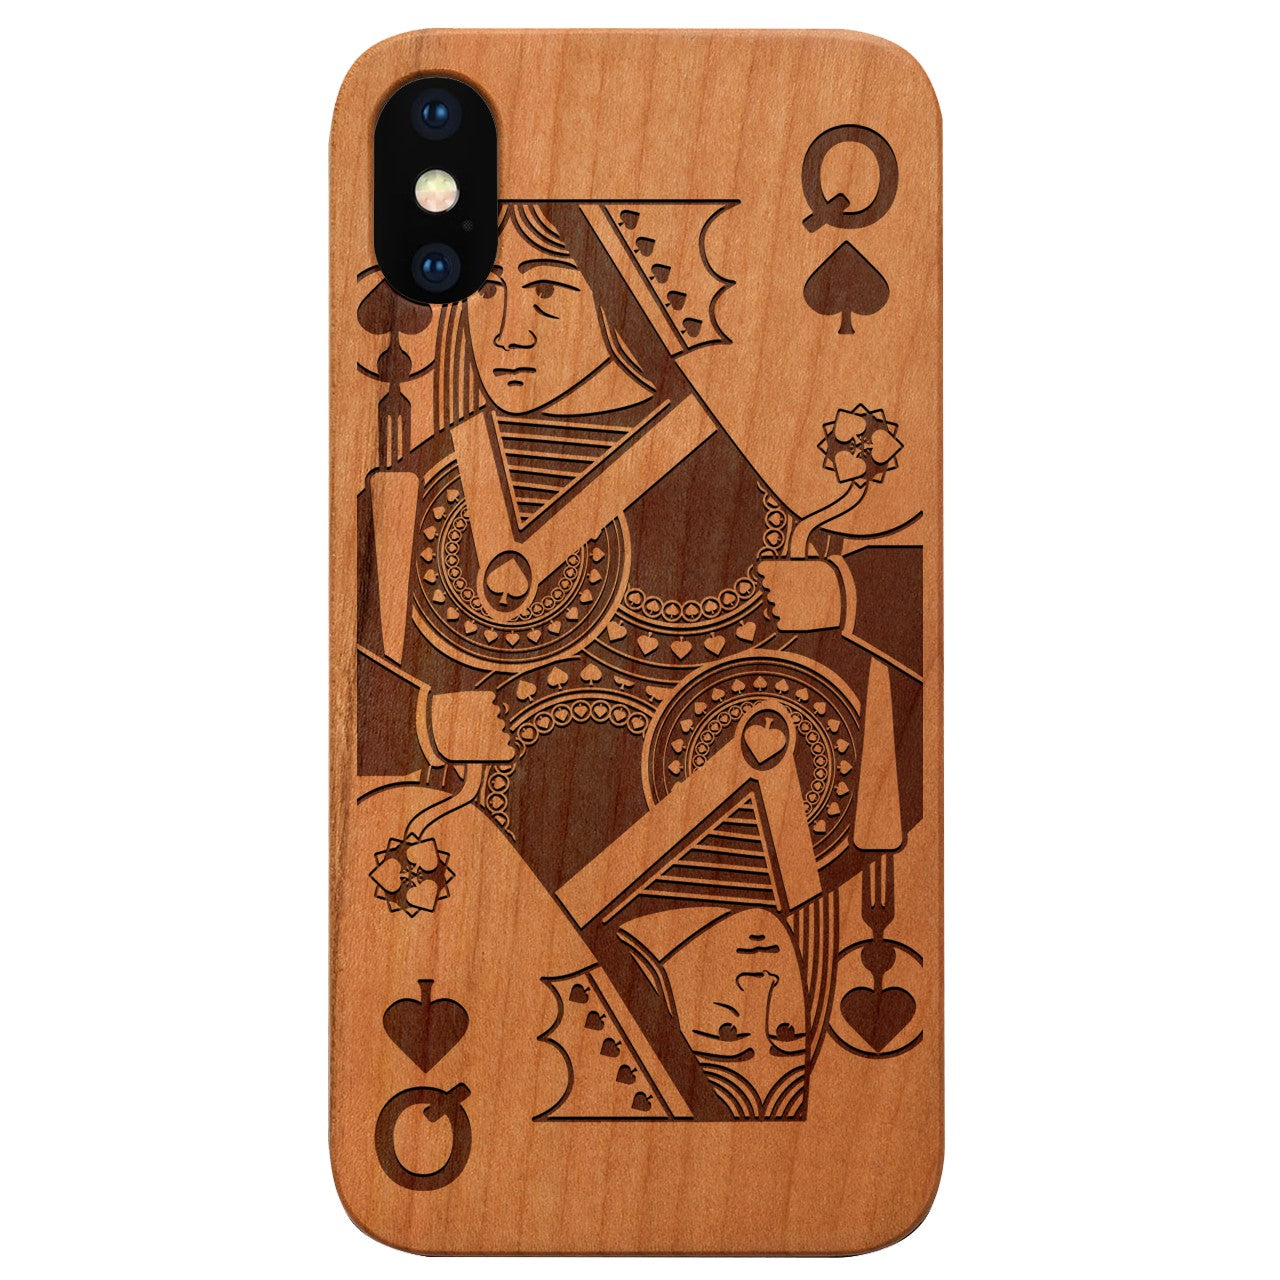  Queen Of Spades - Engraved - Wooden Phone Case - IPhone 13 Models